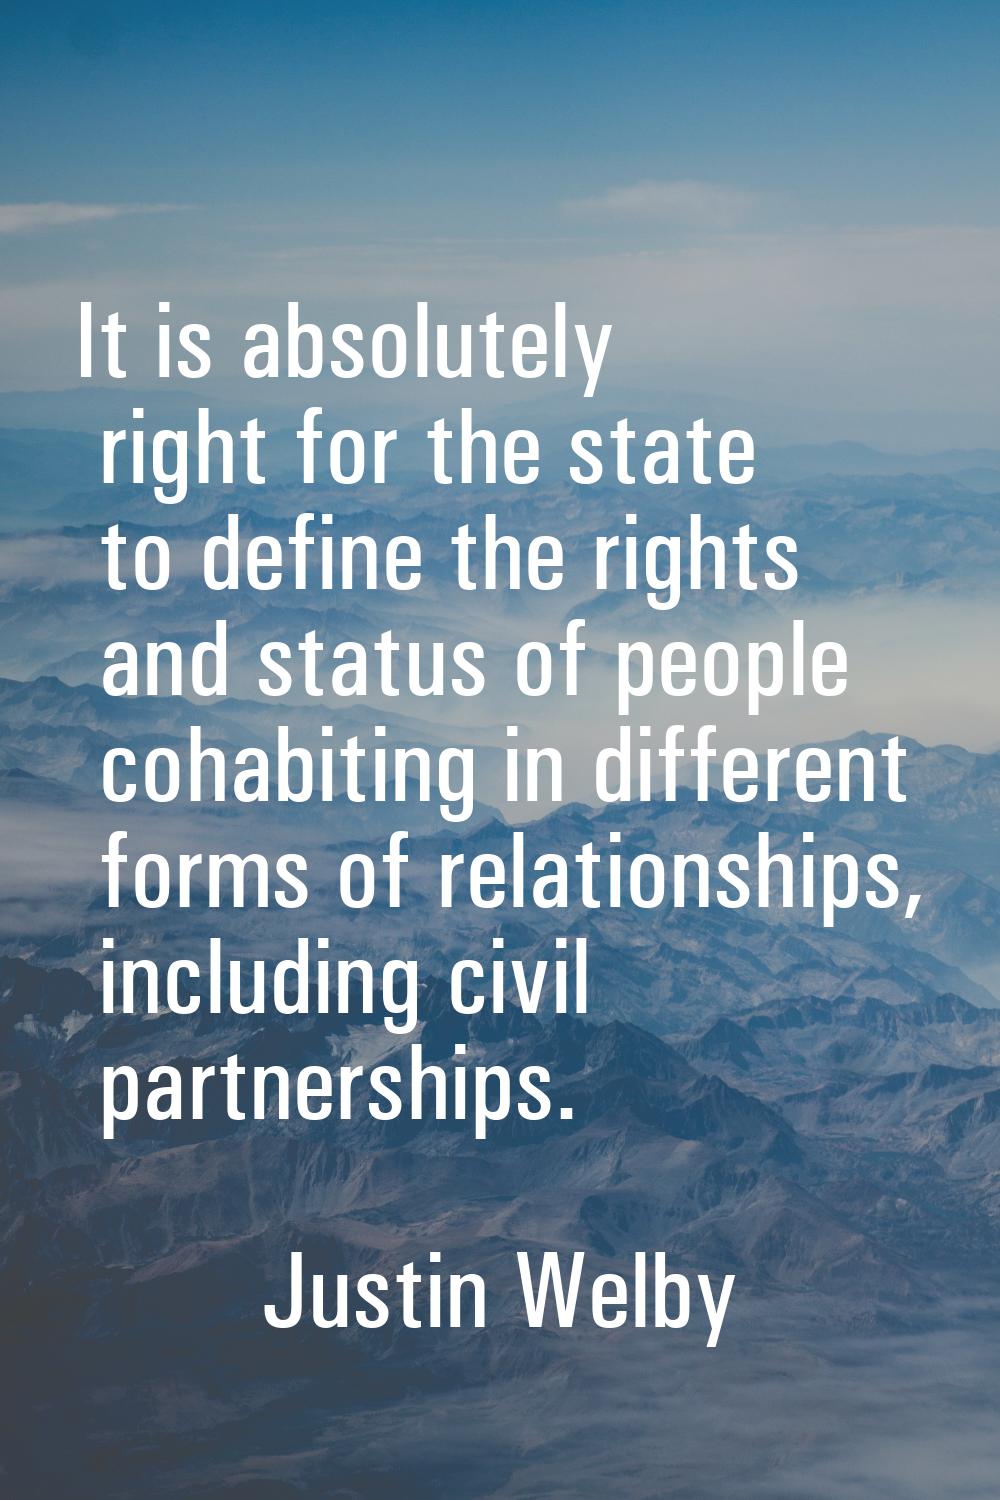 It is absolutely right for the state to define the rights and status of people cohabiting in differ